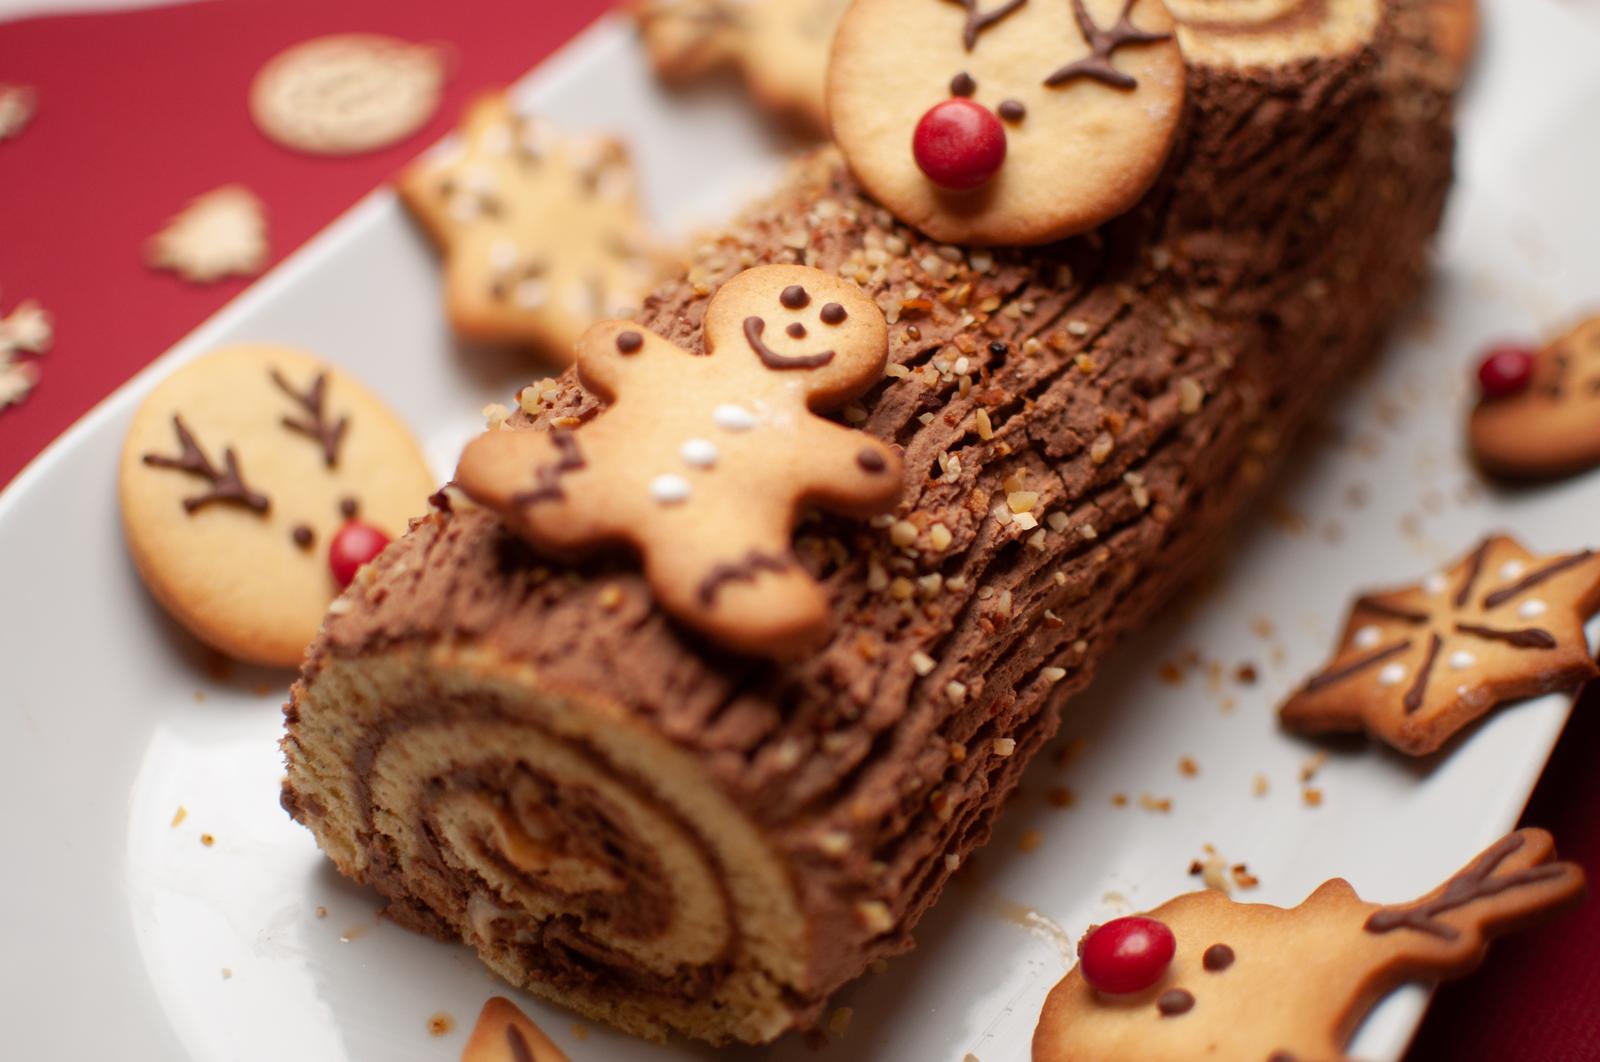 It’s Time to Find Out What Your 🥳 Holiday Vibe Is With the 🎄 Christmas Feast You Plan Yule log